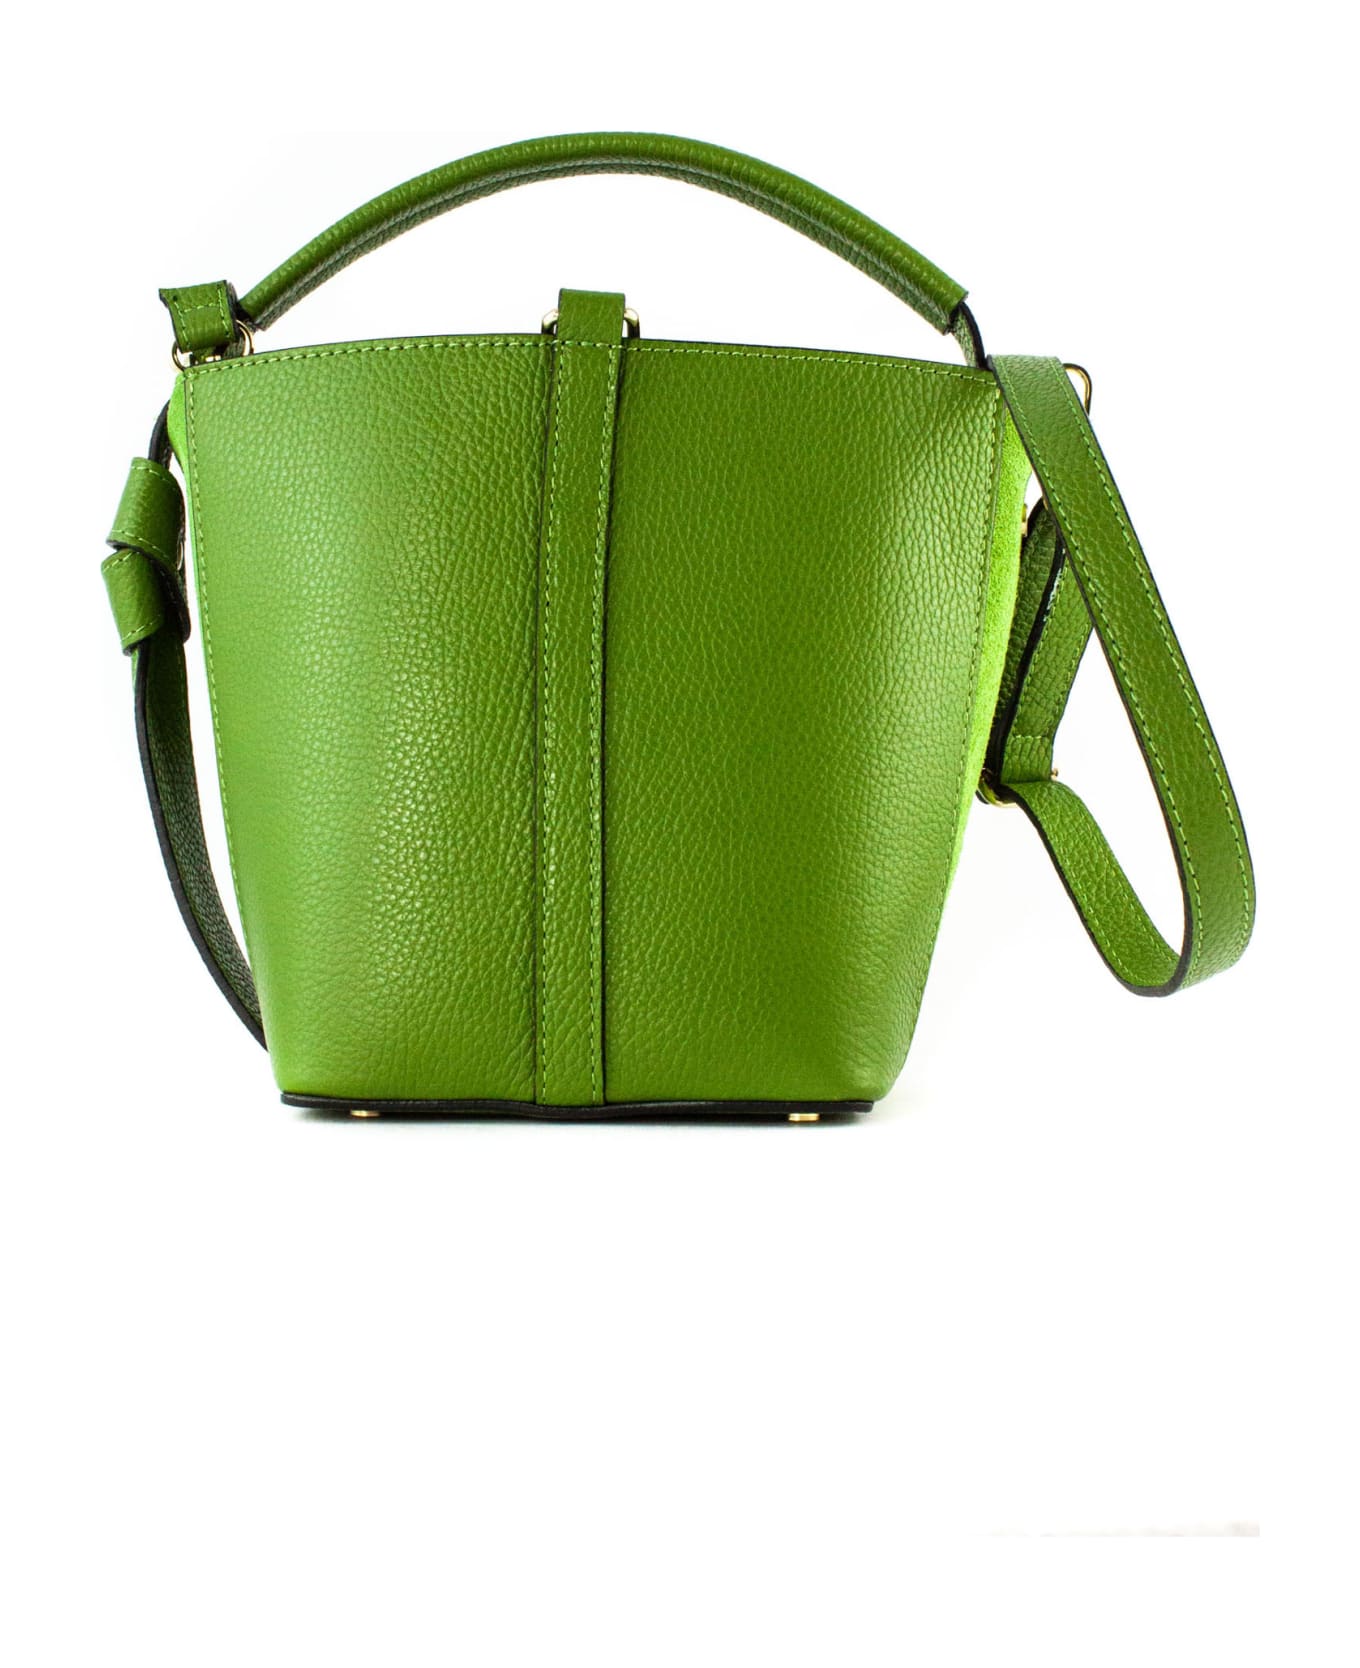 Avenue 67 Green Grained Leather Bag - Verde